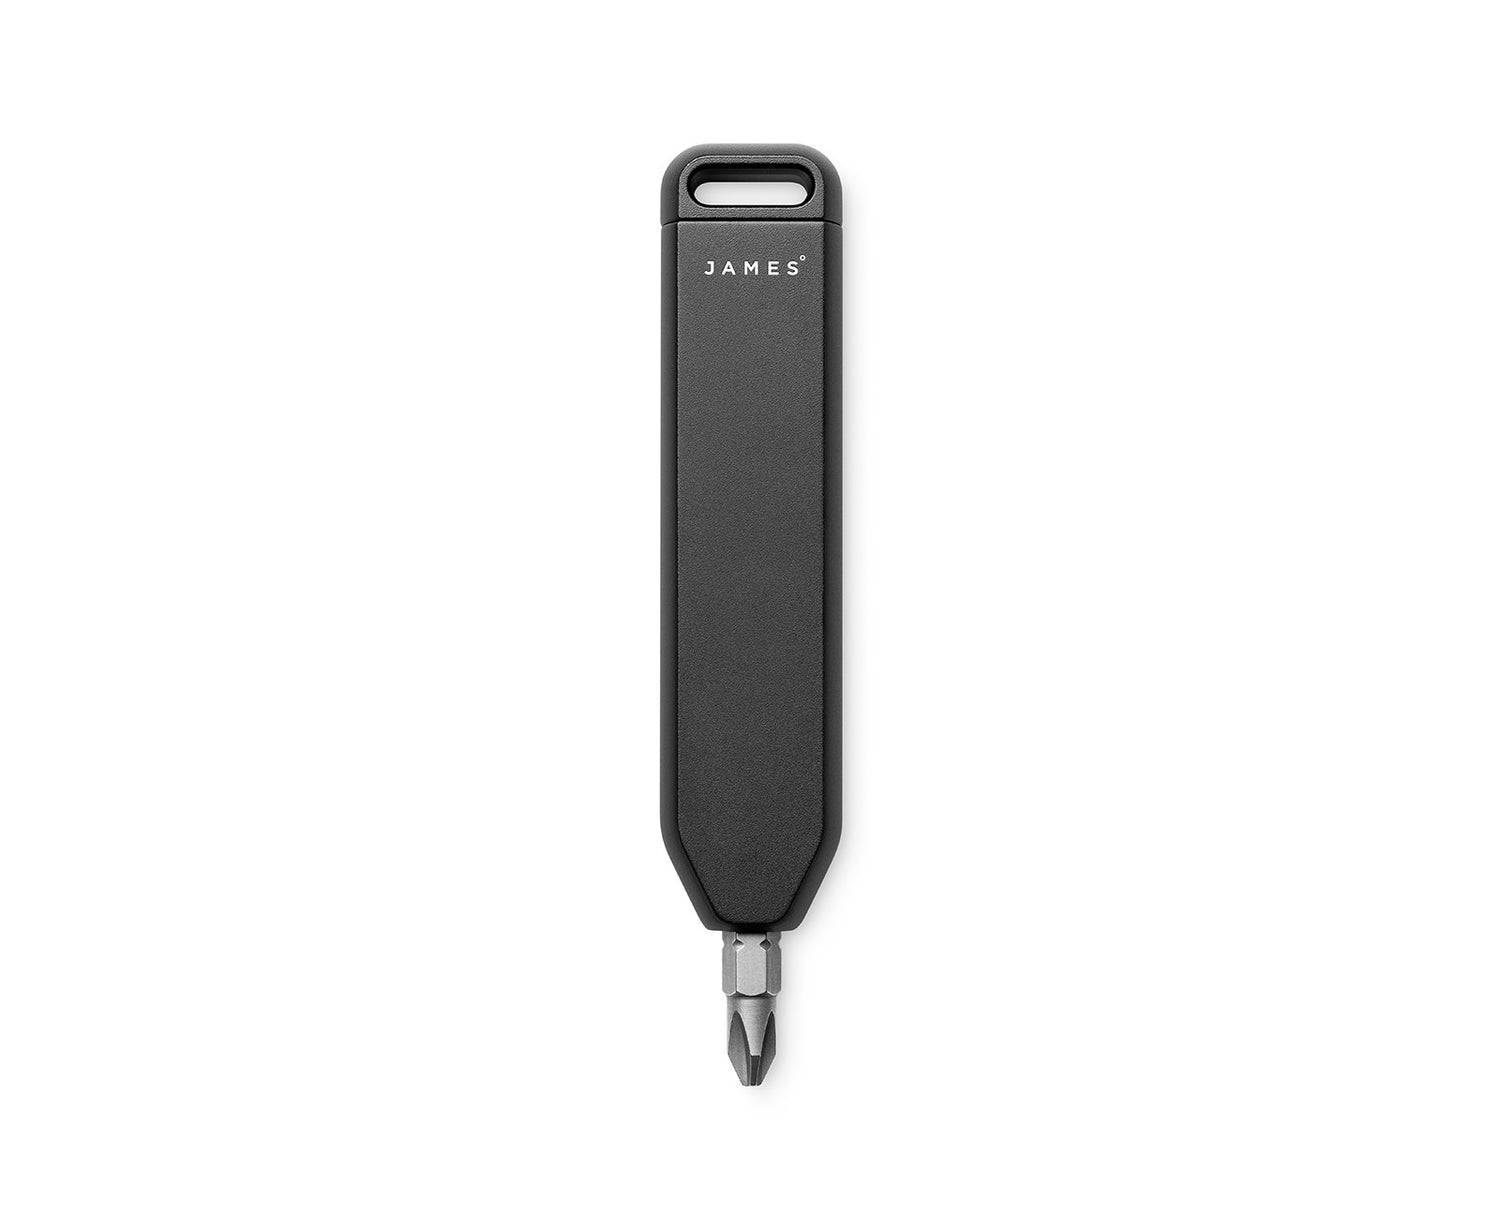 The Warrick EDC Screwdriver in black on a white background.